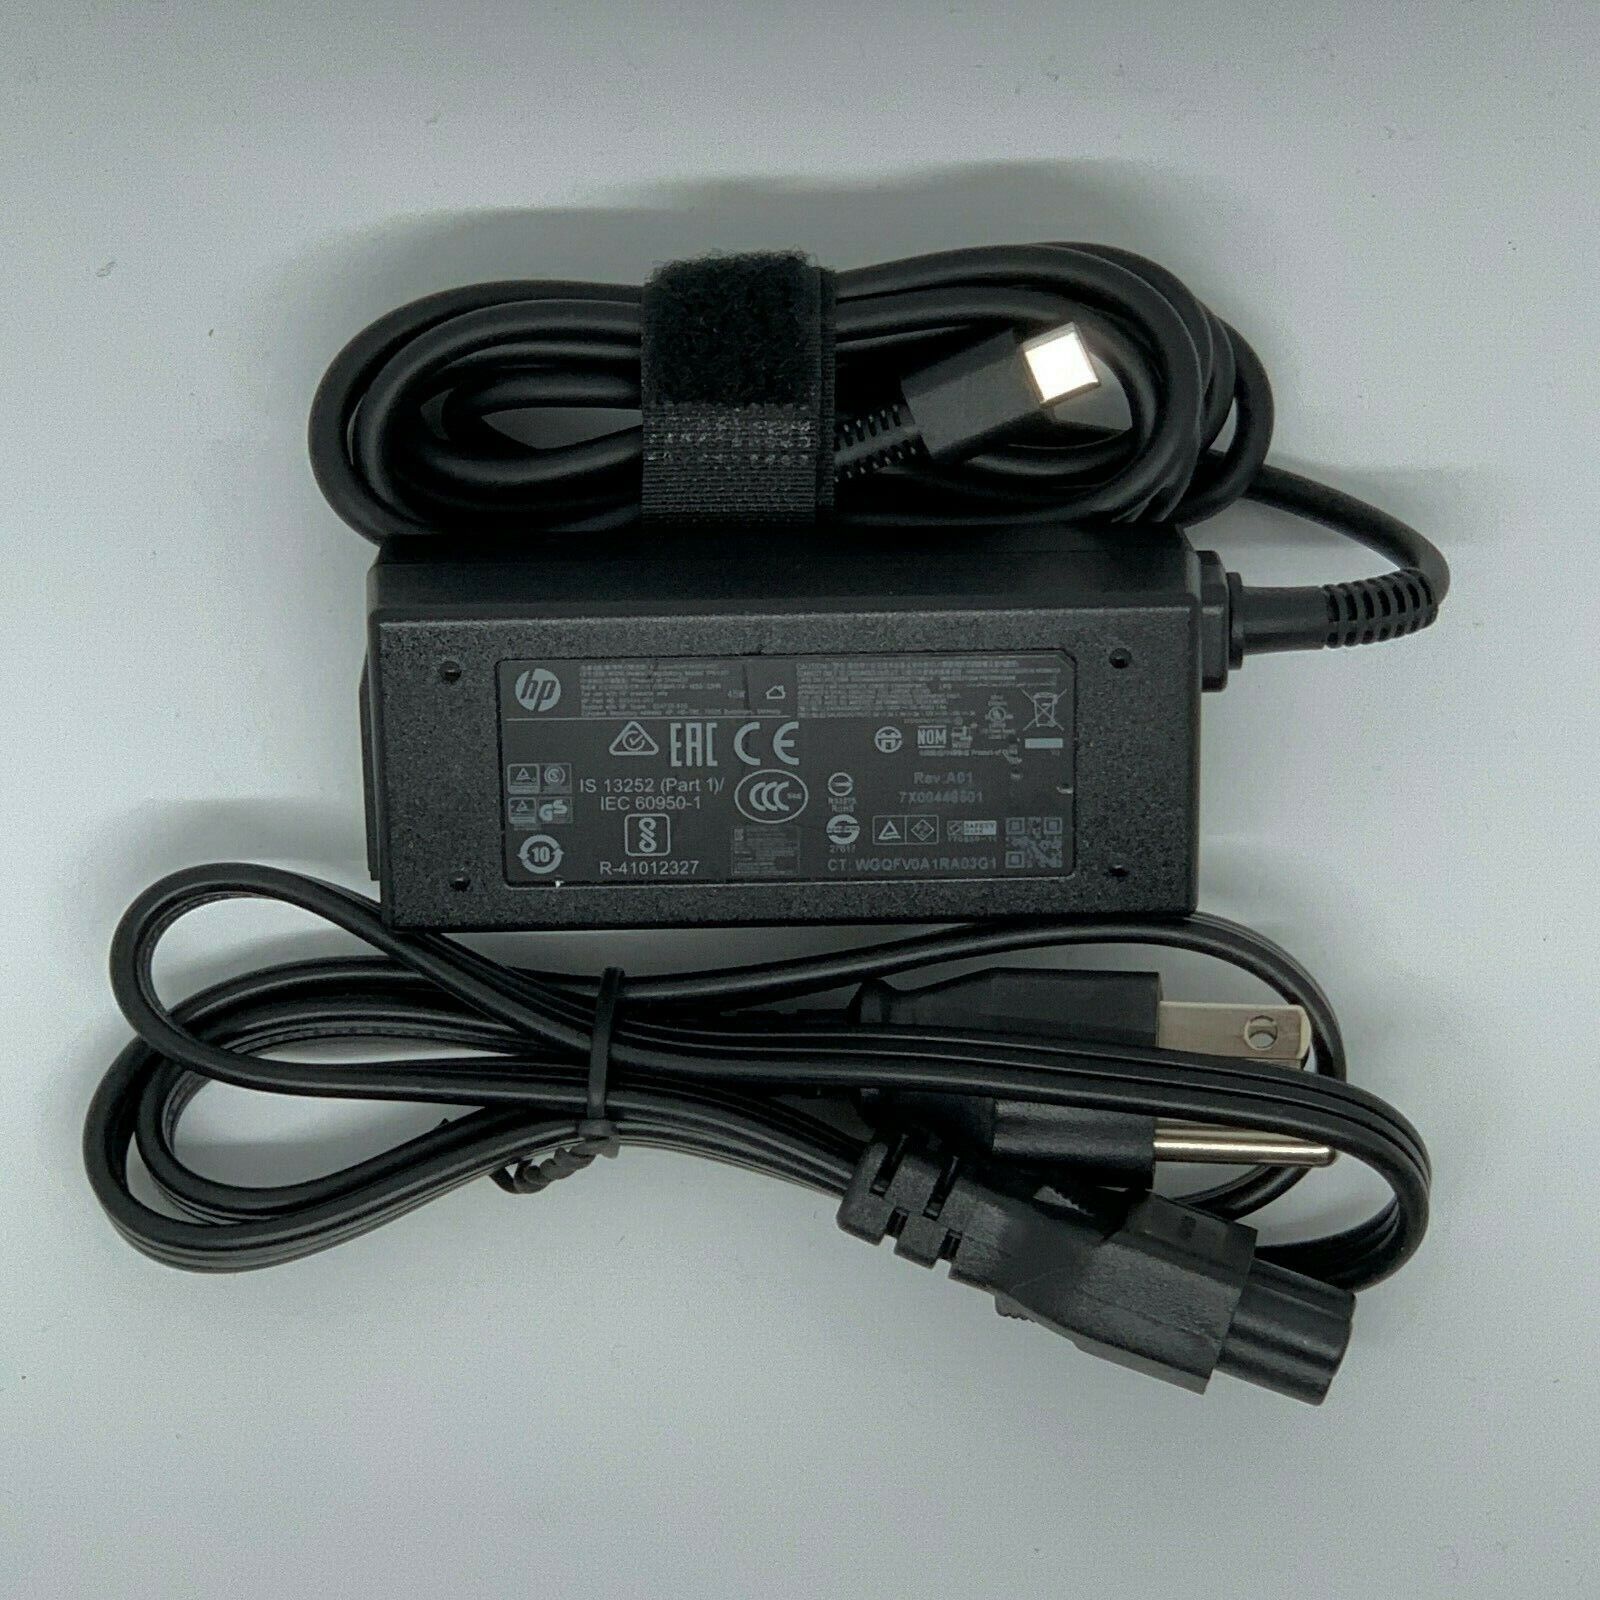 NEW Genuine OEM AC Power Adapter Charger for HP ELITE X2 1012 G1 TABLET 